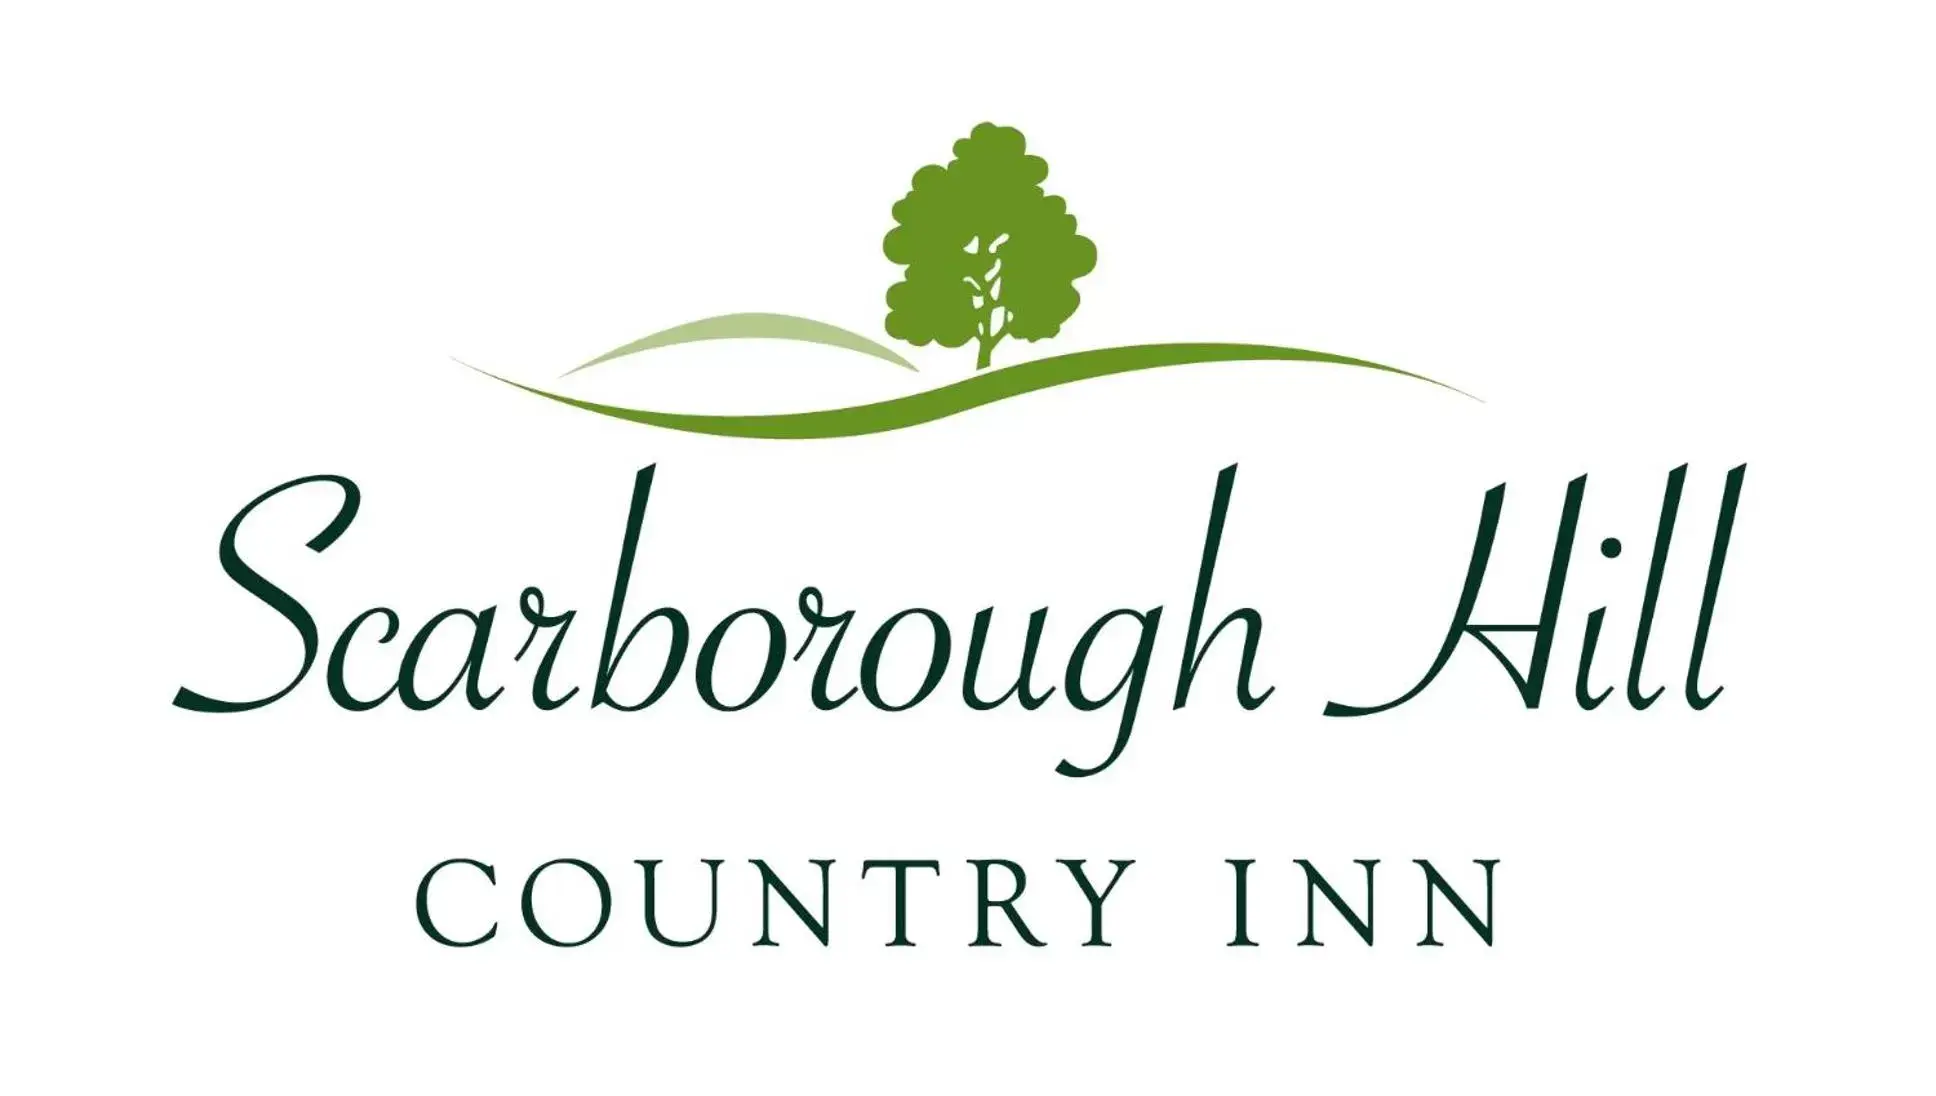 Property Logo/Sign in Scarborough Hill Country Inn